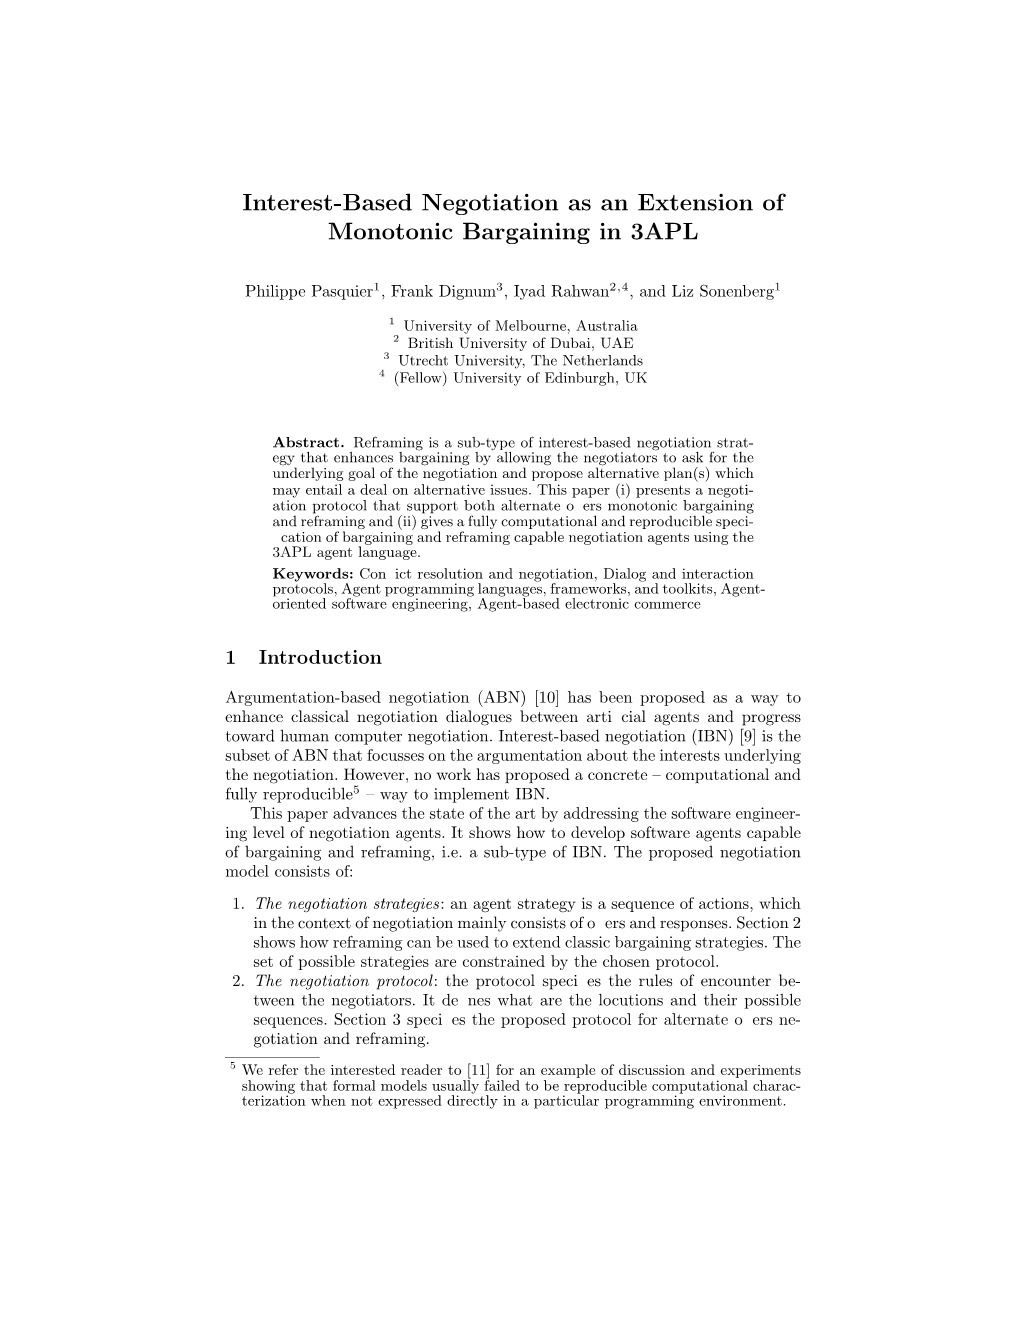 Interest-Based Negotiation As an Extension of Monotonic Bargaining in 3APL